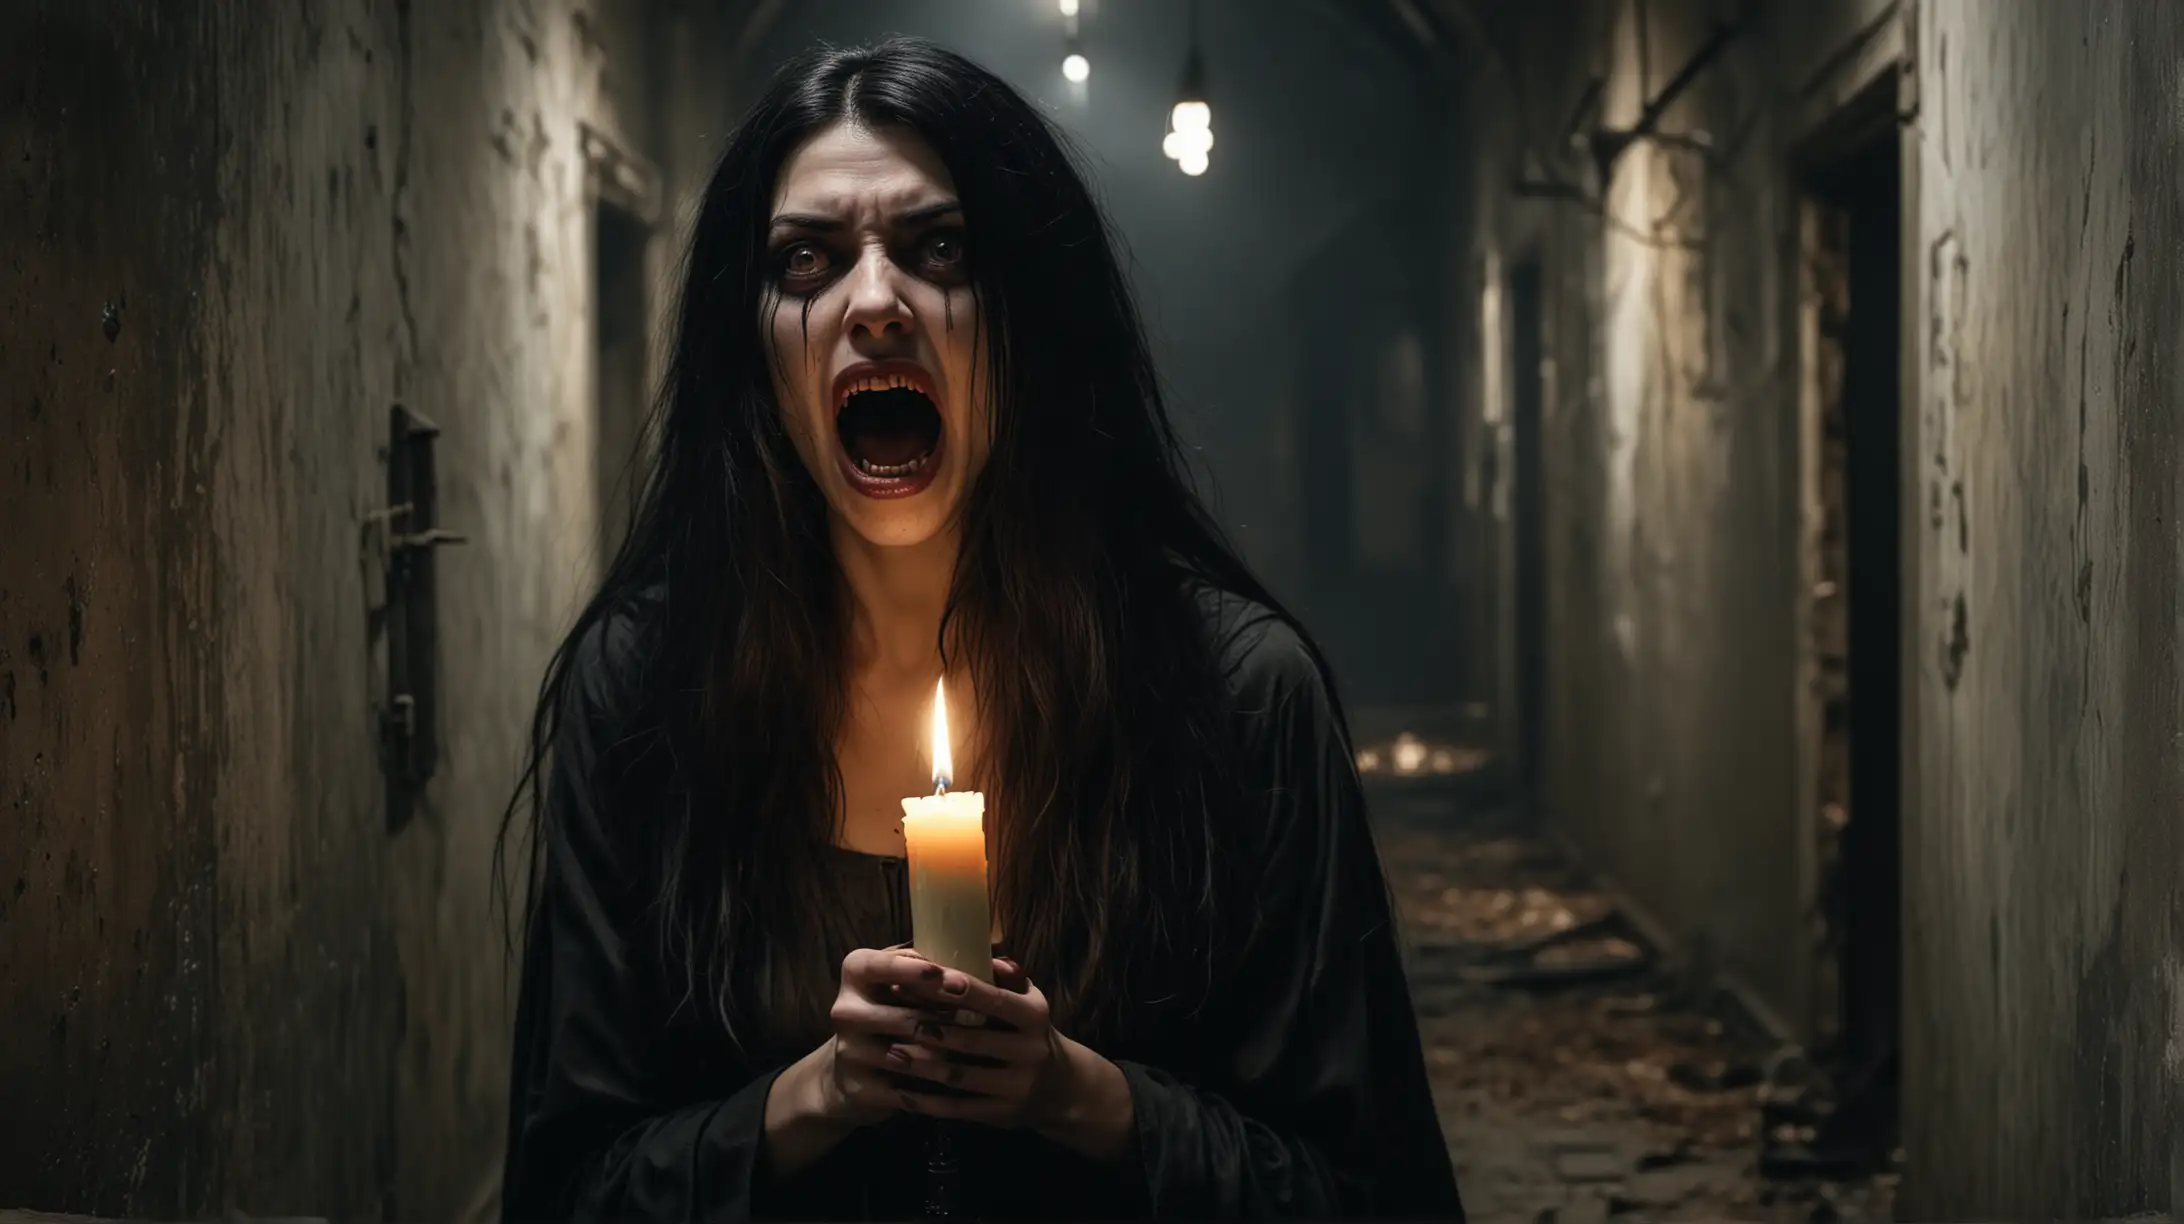 hyperrealistic. The image features a wimsical and scary creature with a horror face, long black hair. She have wide open mouth full of sharp teeth. The witch is holding a candle in one hand, which adds to the eerie atmosphere of the scene. The combination of her creepy and scary appearance creates a unique and intriguing character that captures the viewer's attention.  the background is an asylum corridor.scary atmosphere